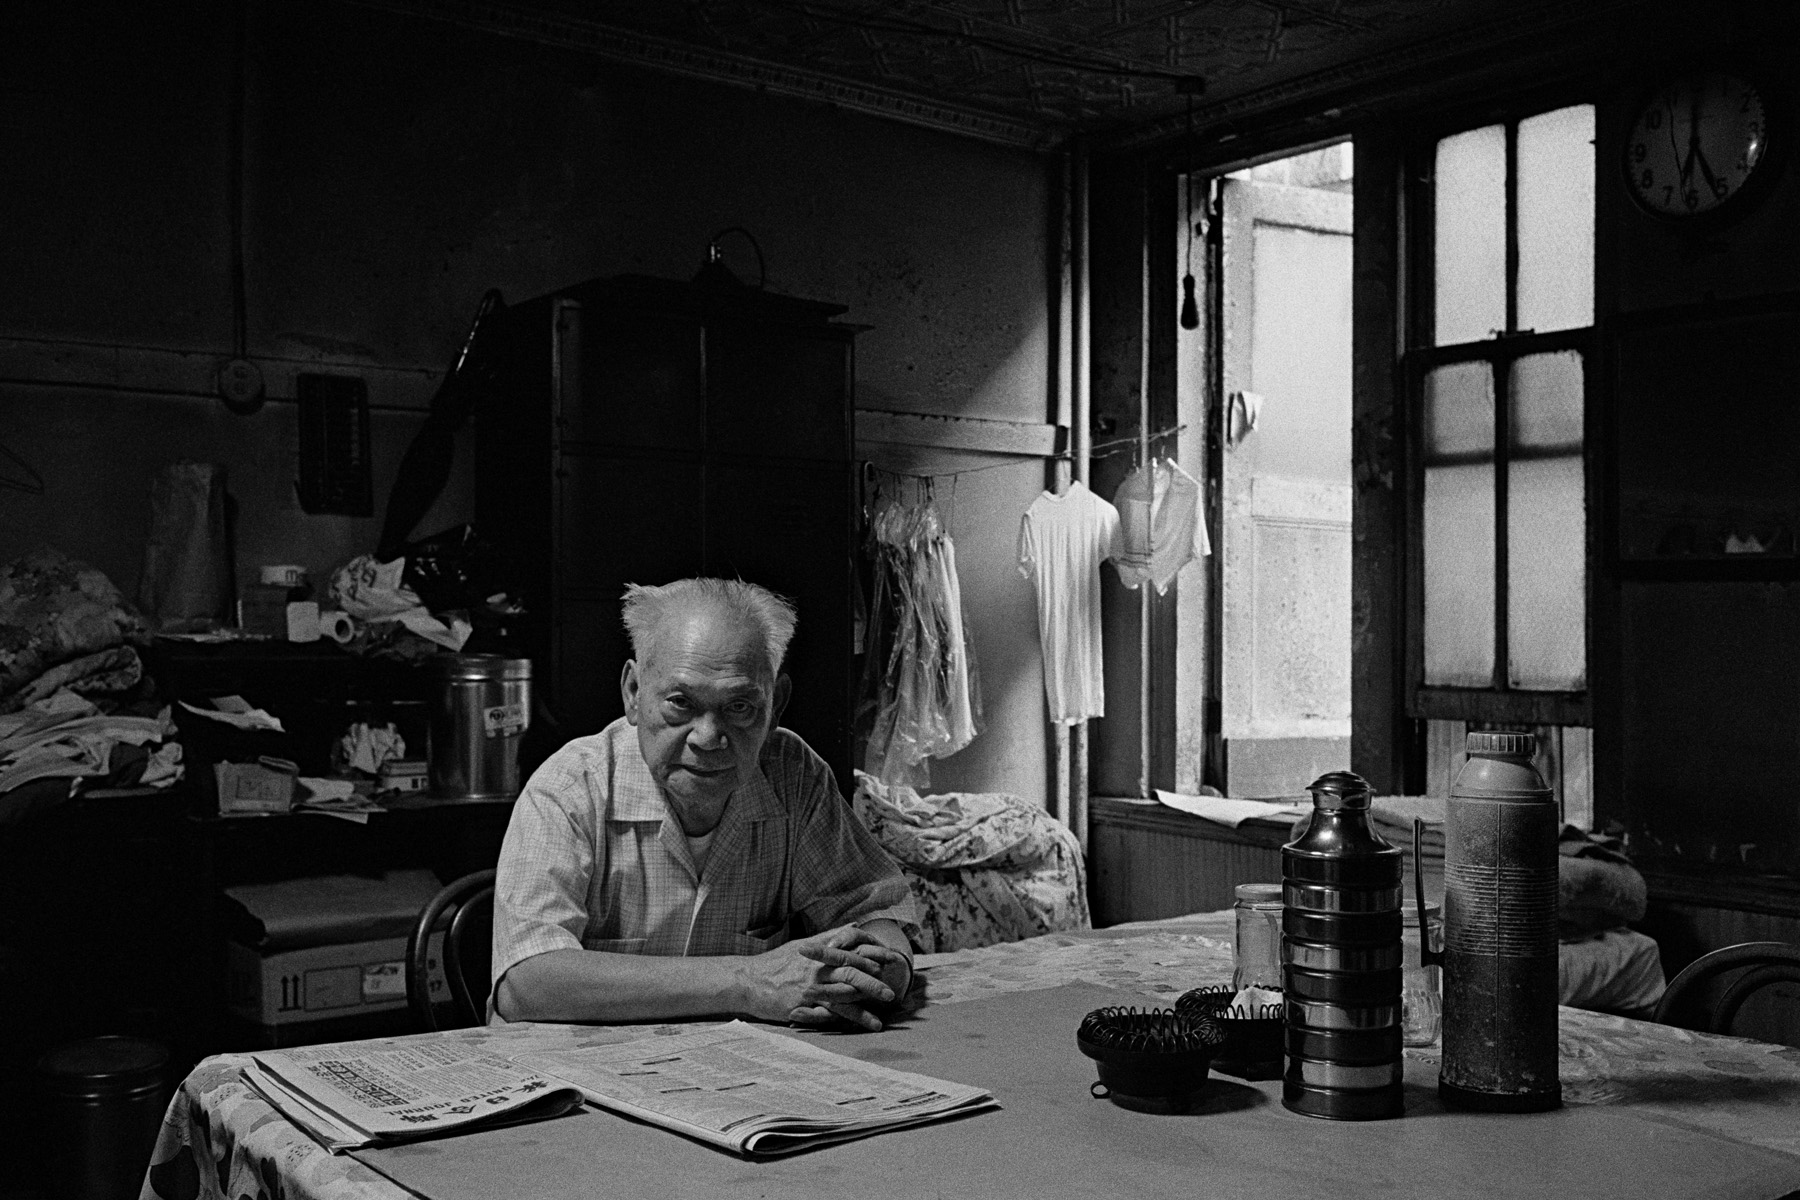 Mr. Ng sits at the table in the apartment he shares with 3 other men, Bayard St., New York Chinatown, 1982